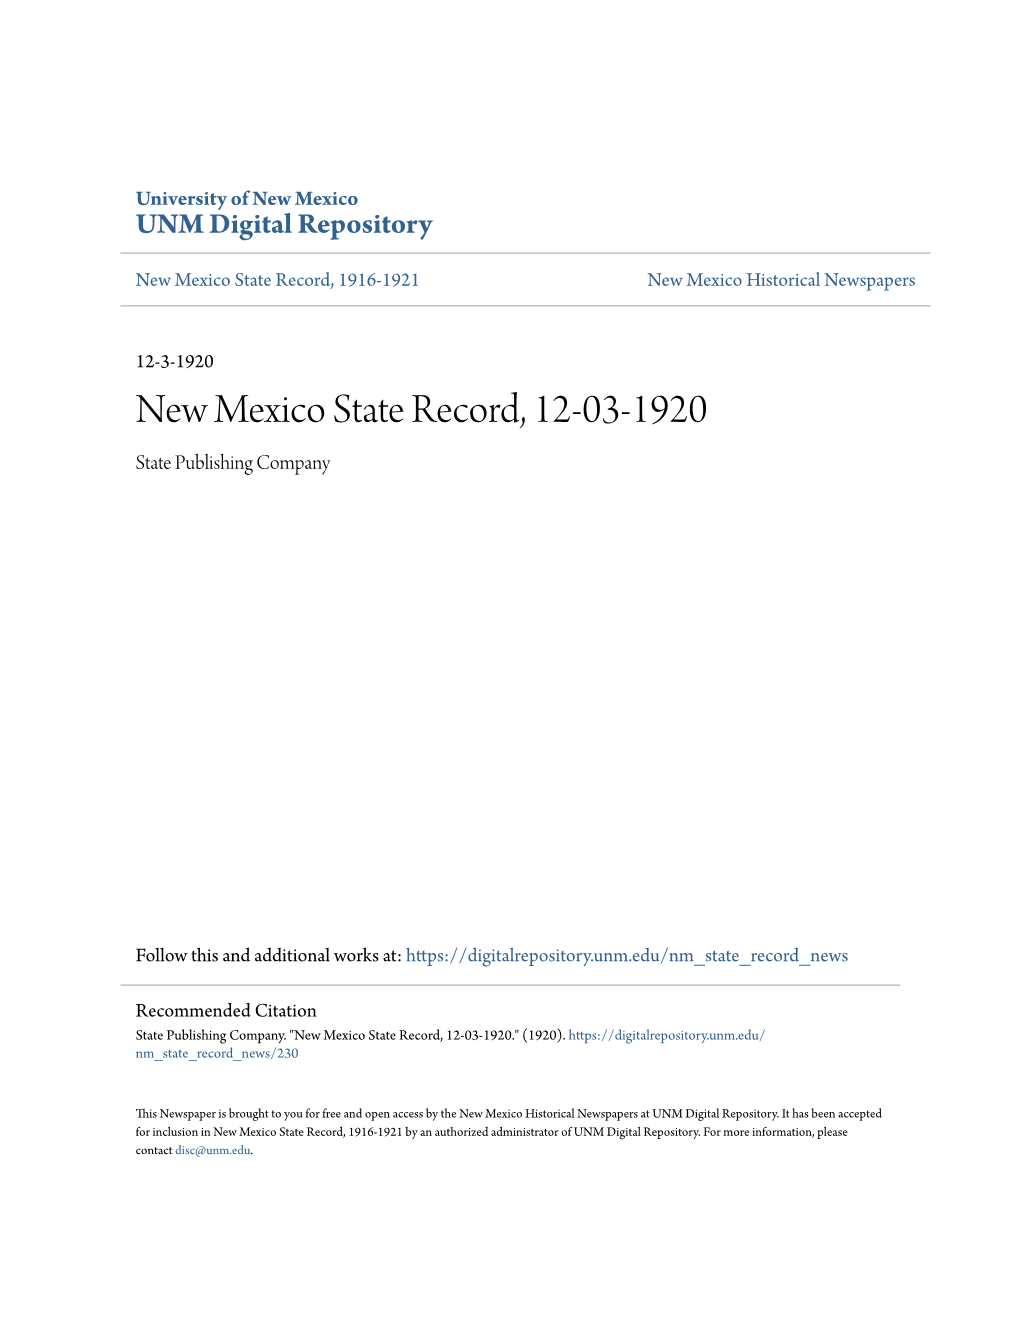 New Mexico State Record, 12-03-1920 State Publishing Company